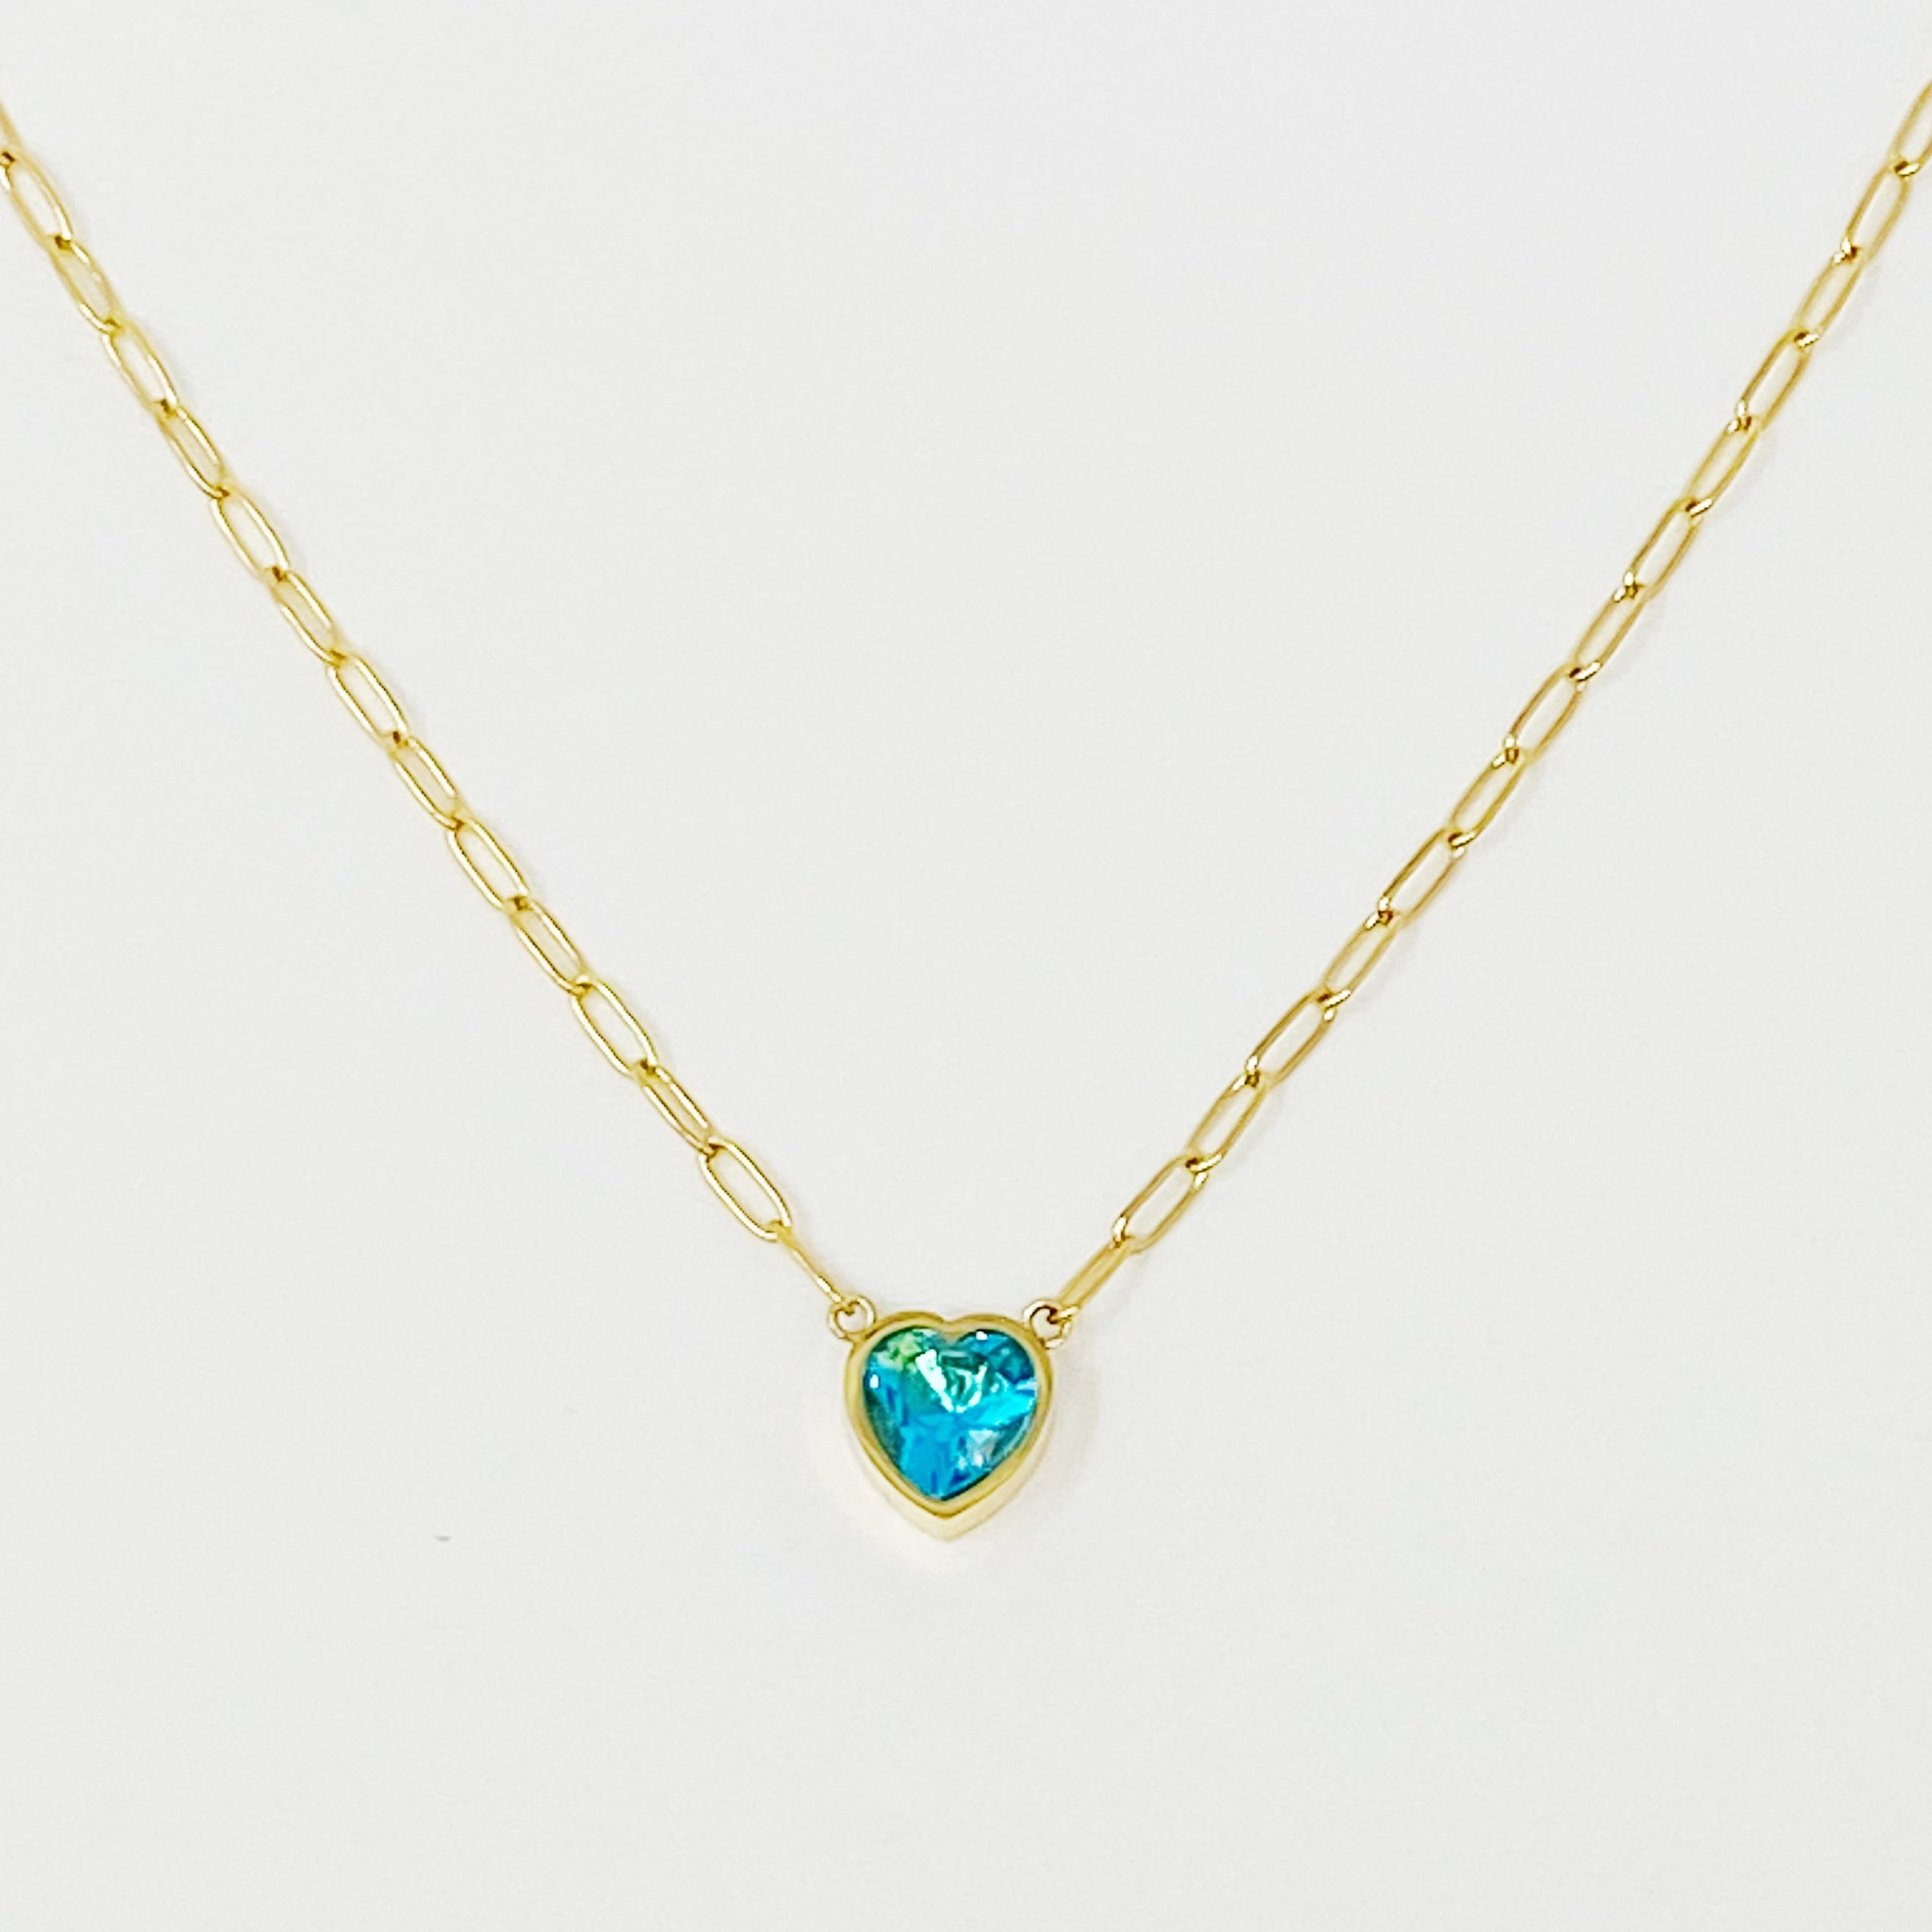 Chained To My Heart Necklace Ellisonyoung.com